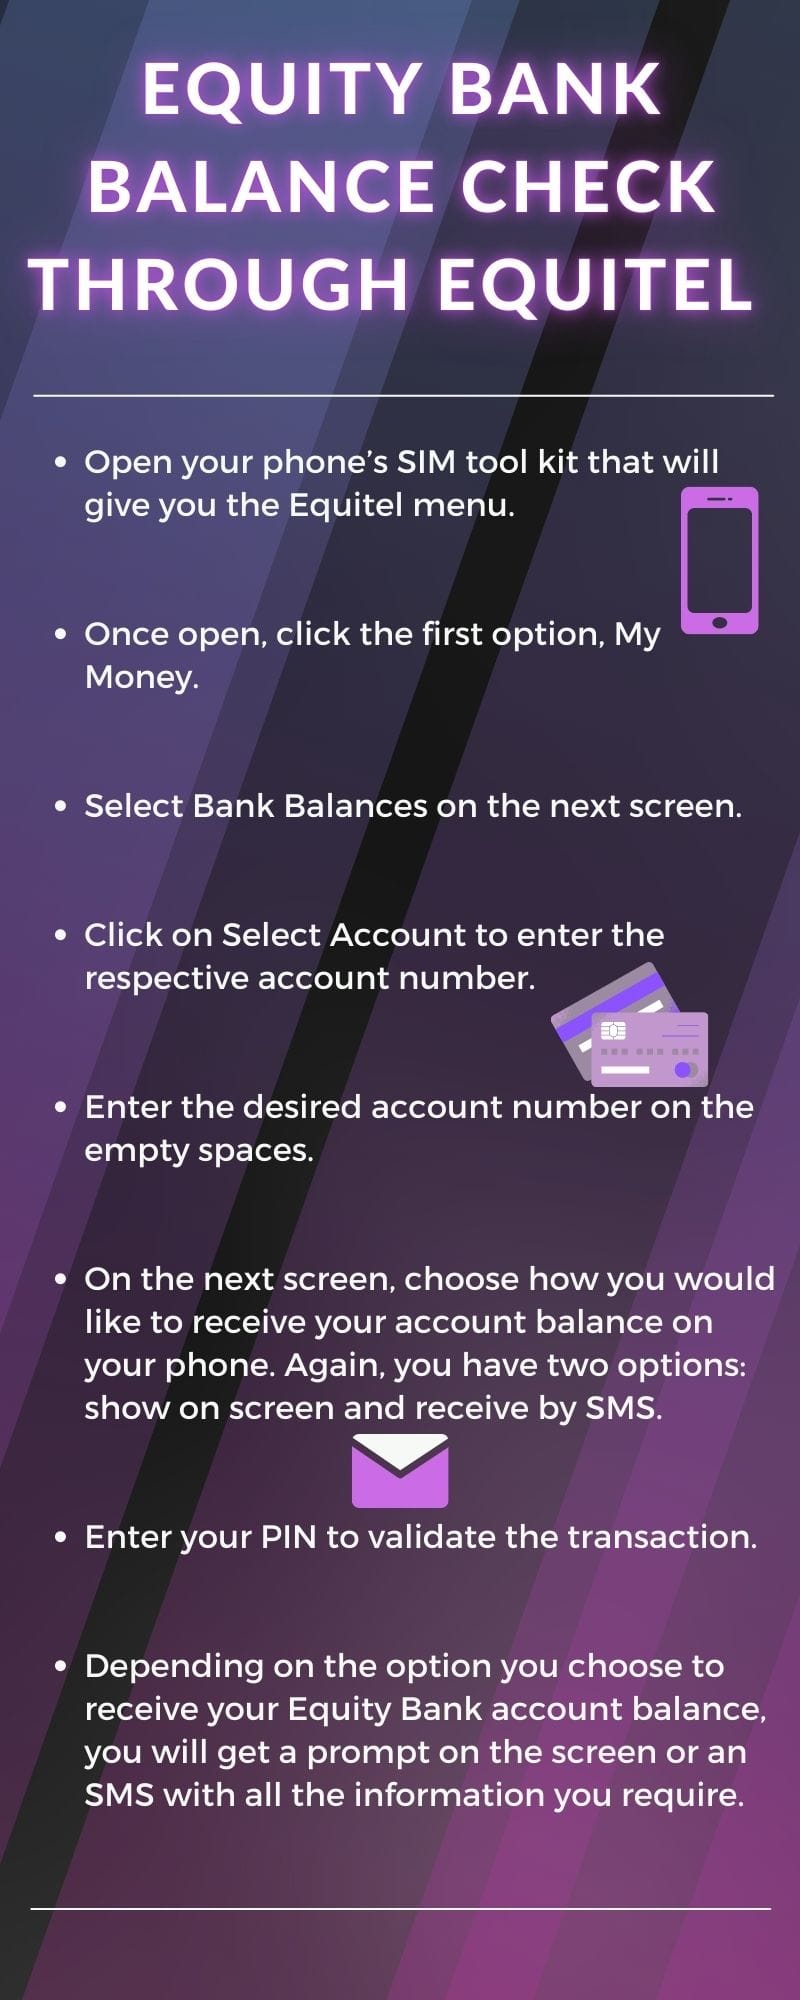 How to check my Equity Bank account balance